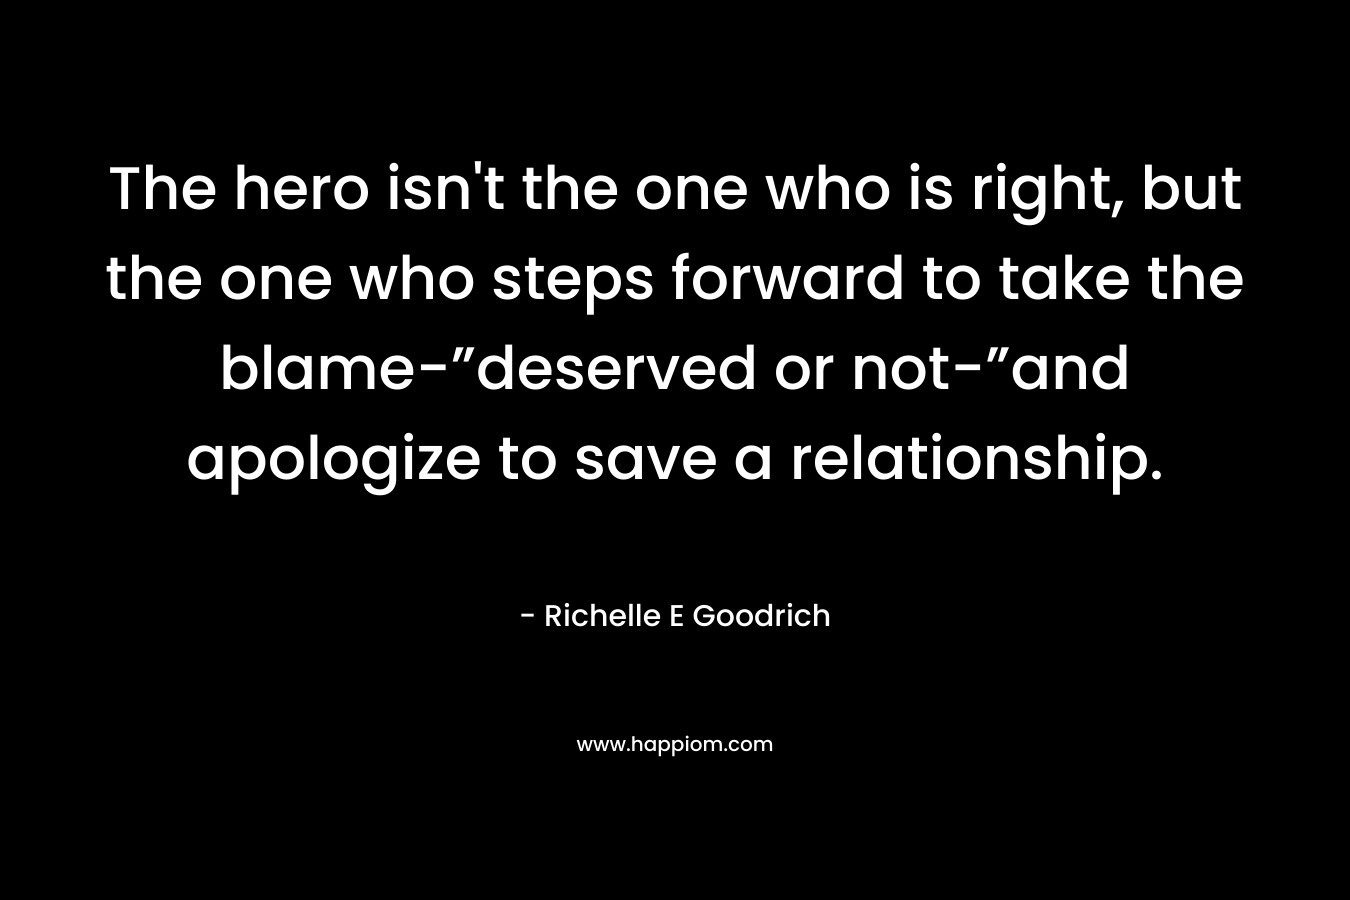 The hero isn’t the one who is right, but the one who steps forward to take the blame-”deserved or not-”and apologize to save a relationship. – Richelle E Goodrich